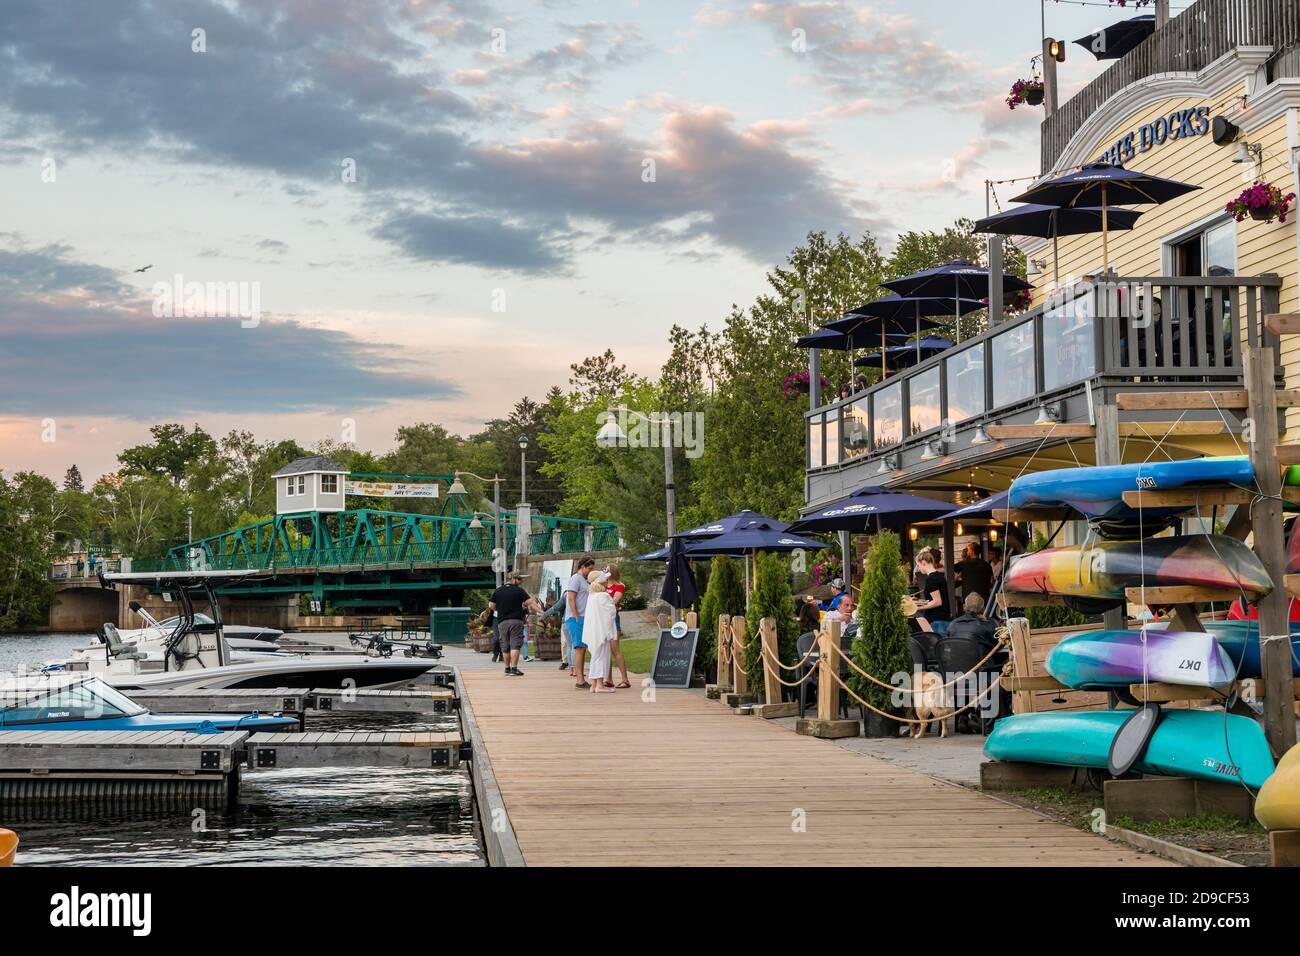 The Town Docks, the old swing bridge and businesses along the Muskoka River in Huntsville, Ontario. Stock Photo